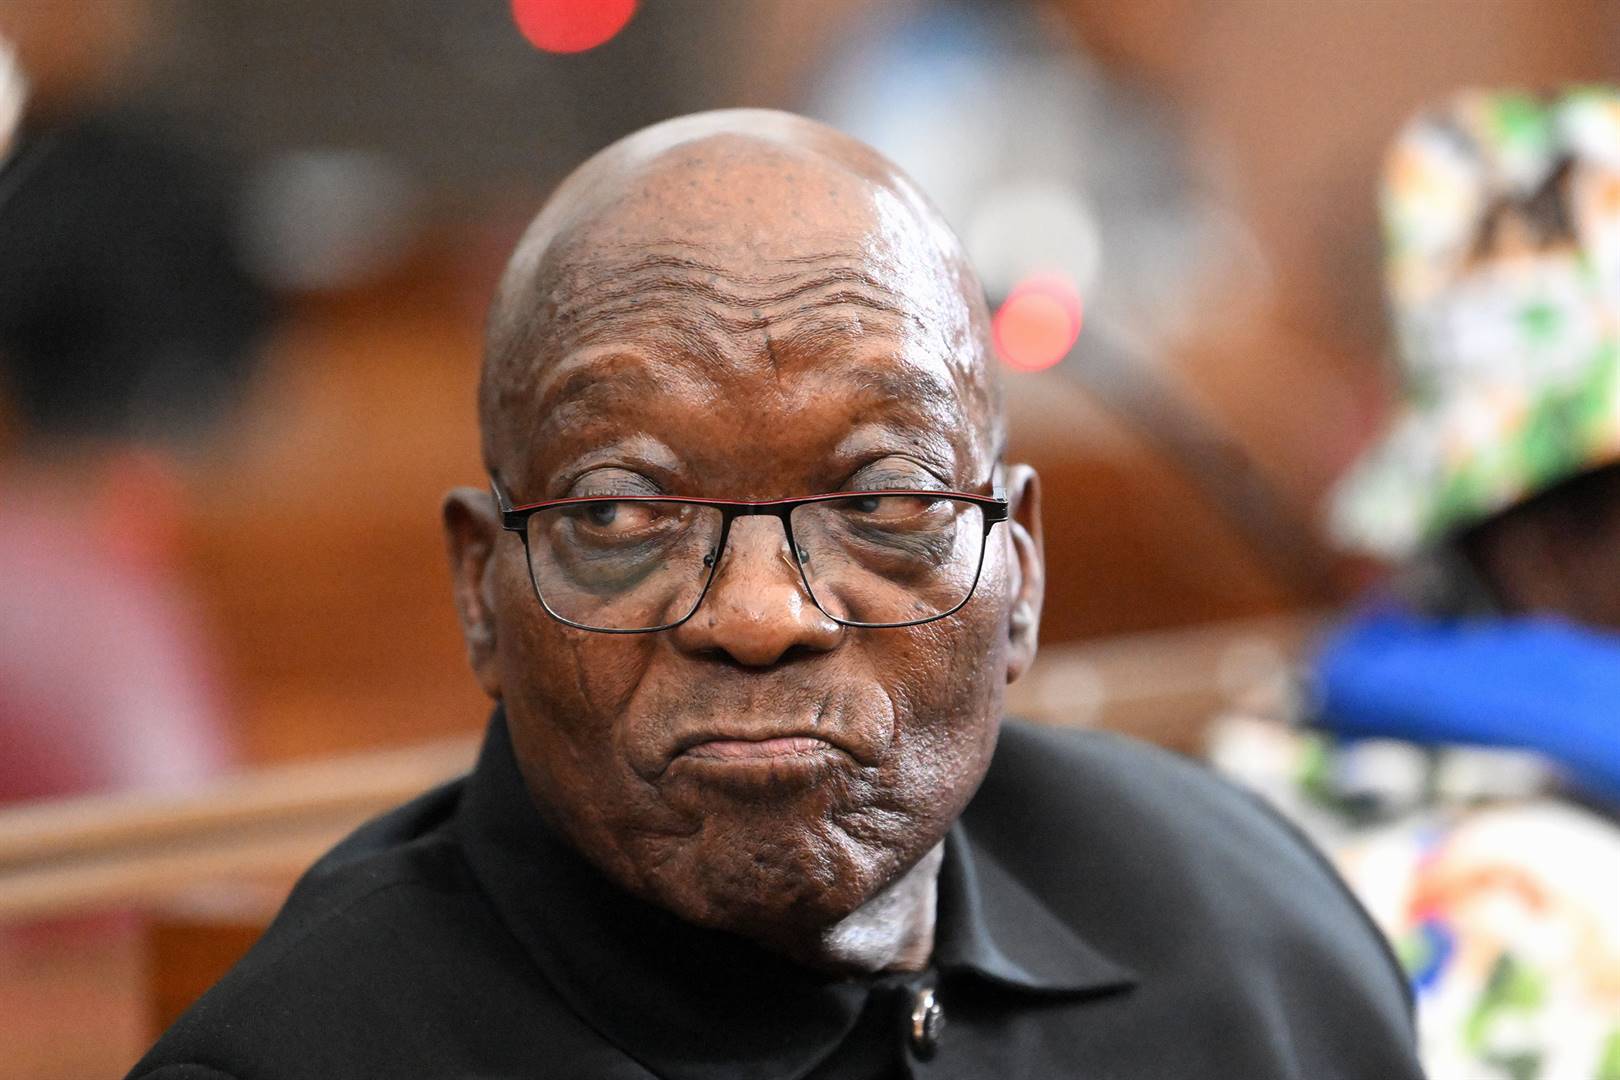 Former president Jacob Zuma is not eligible to become an MP, the Constitutional Court ruled on Monday. (Melinda Stuurman/Netwerk24)